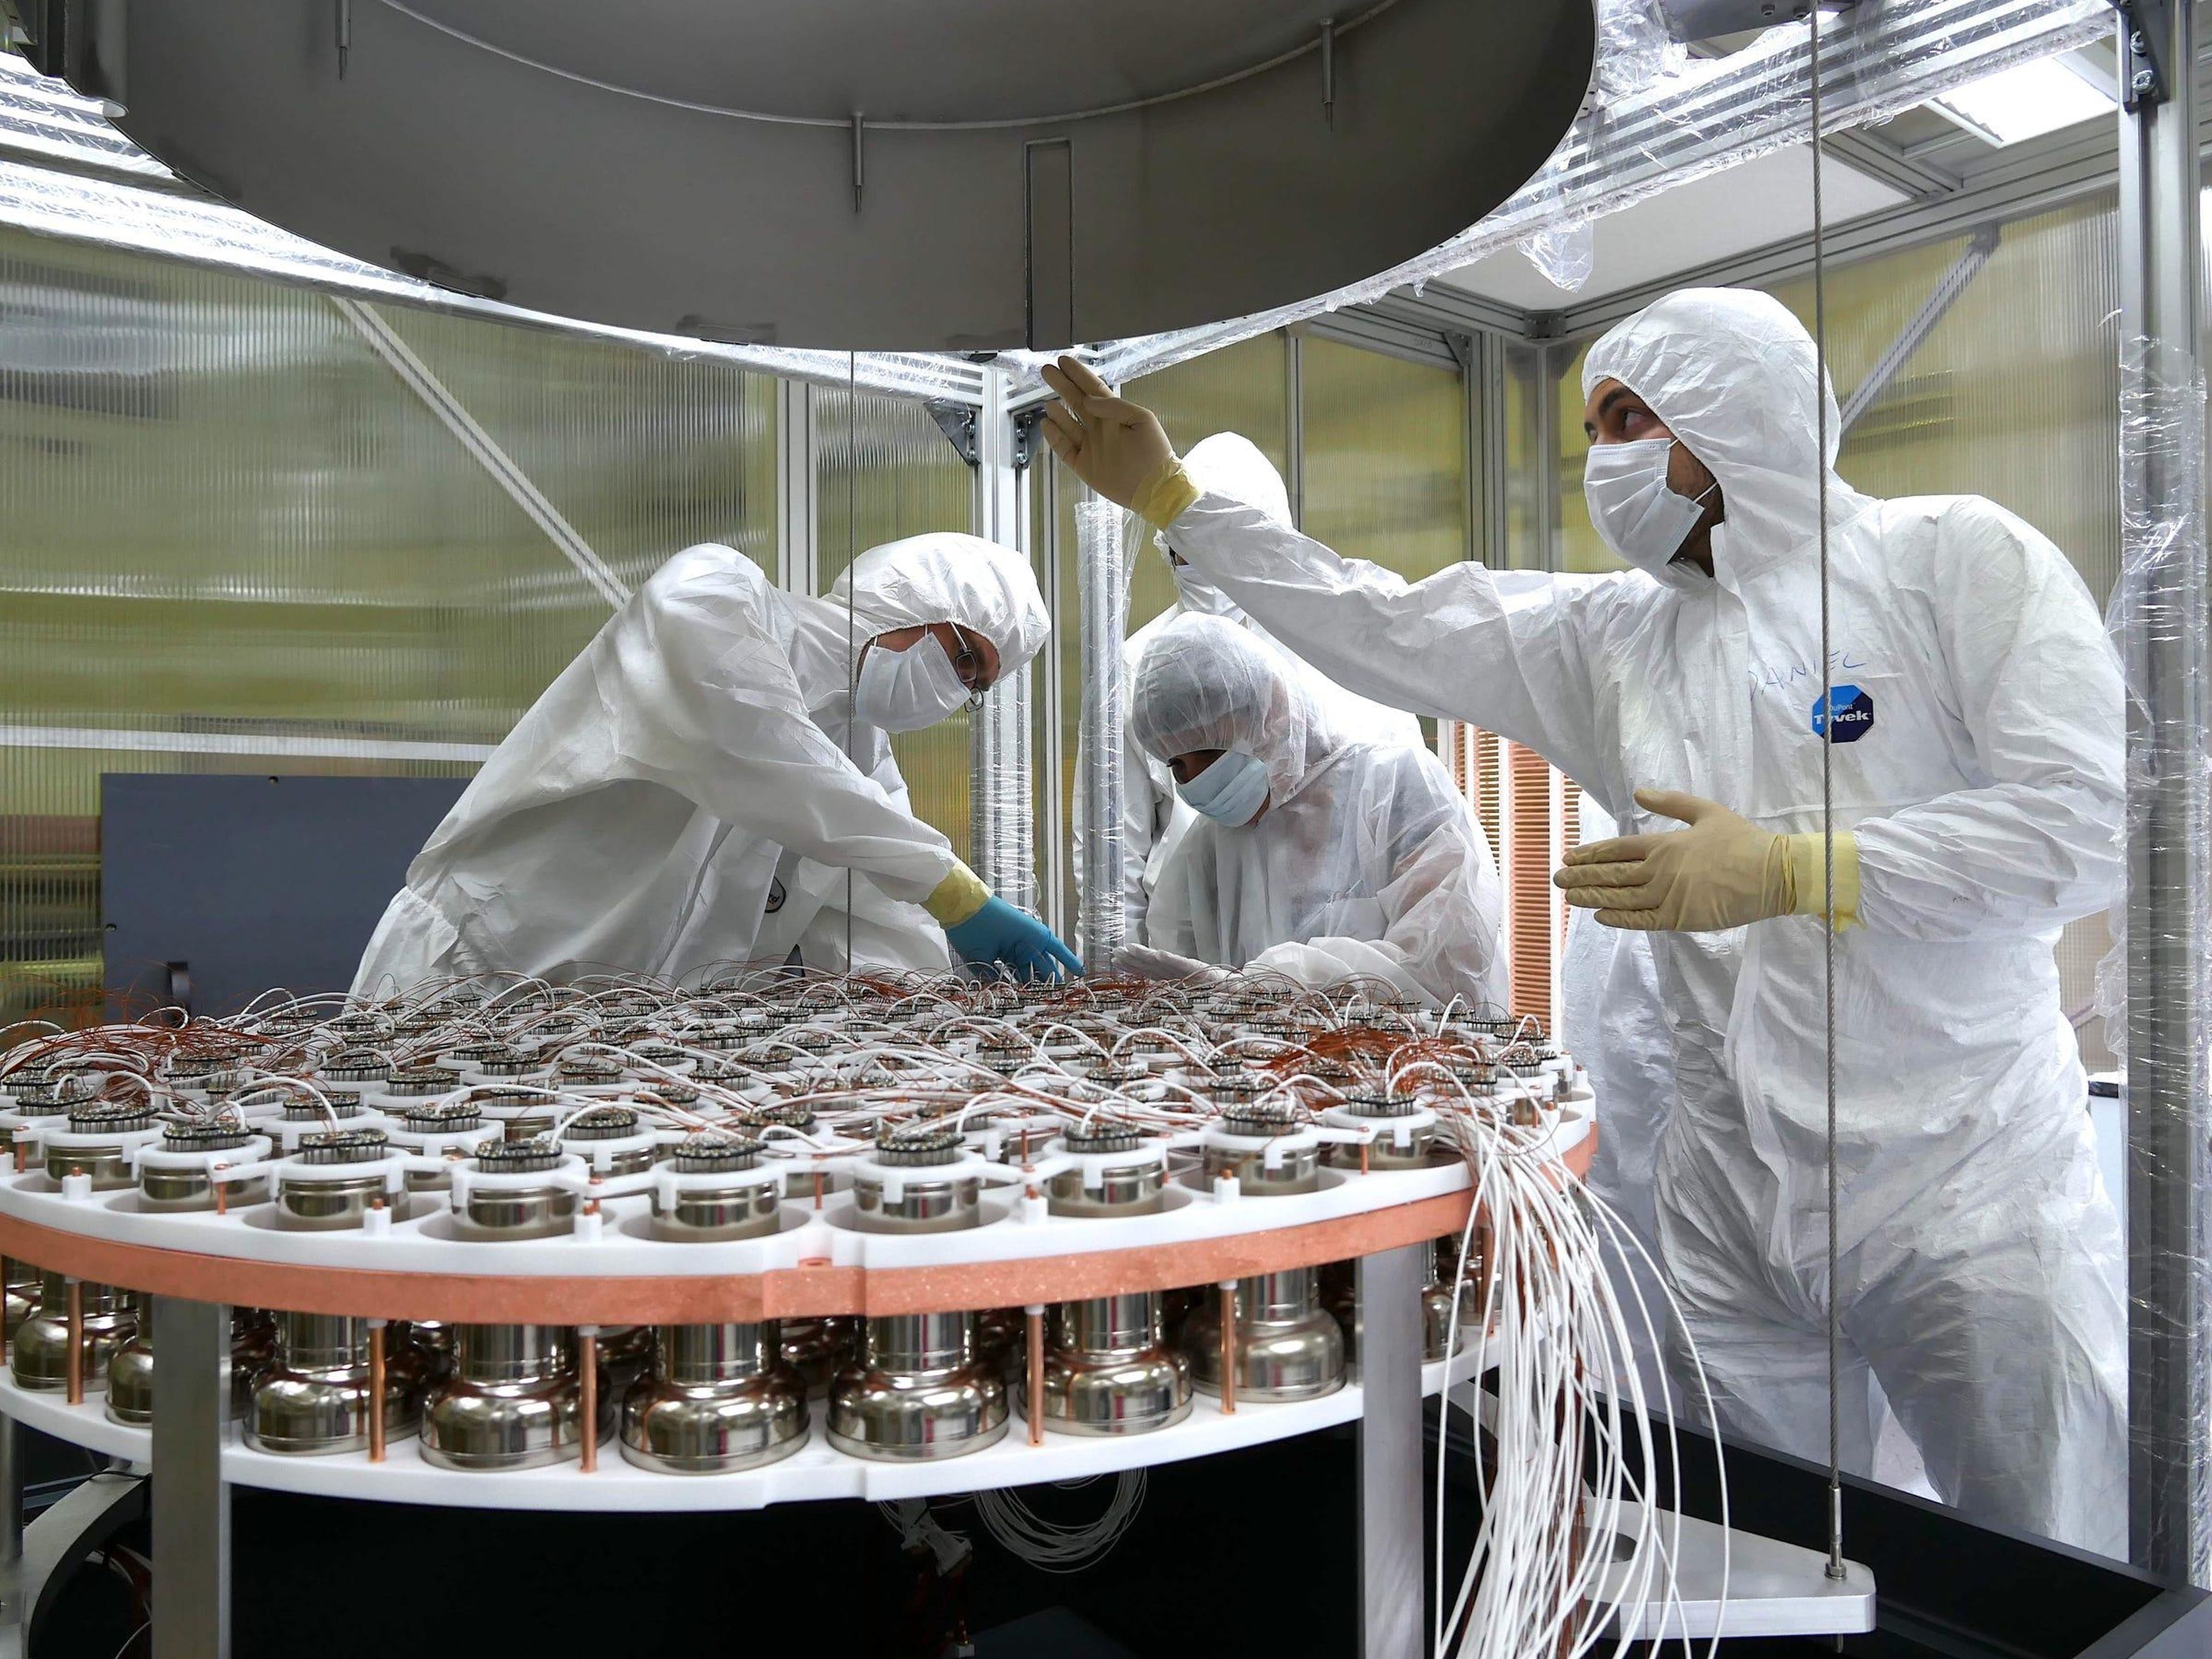 Experts construct the top array of photomultiplier tubes, which detect flashes of light from particle interactions.